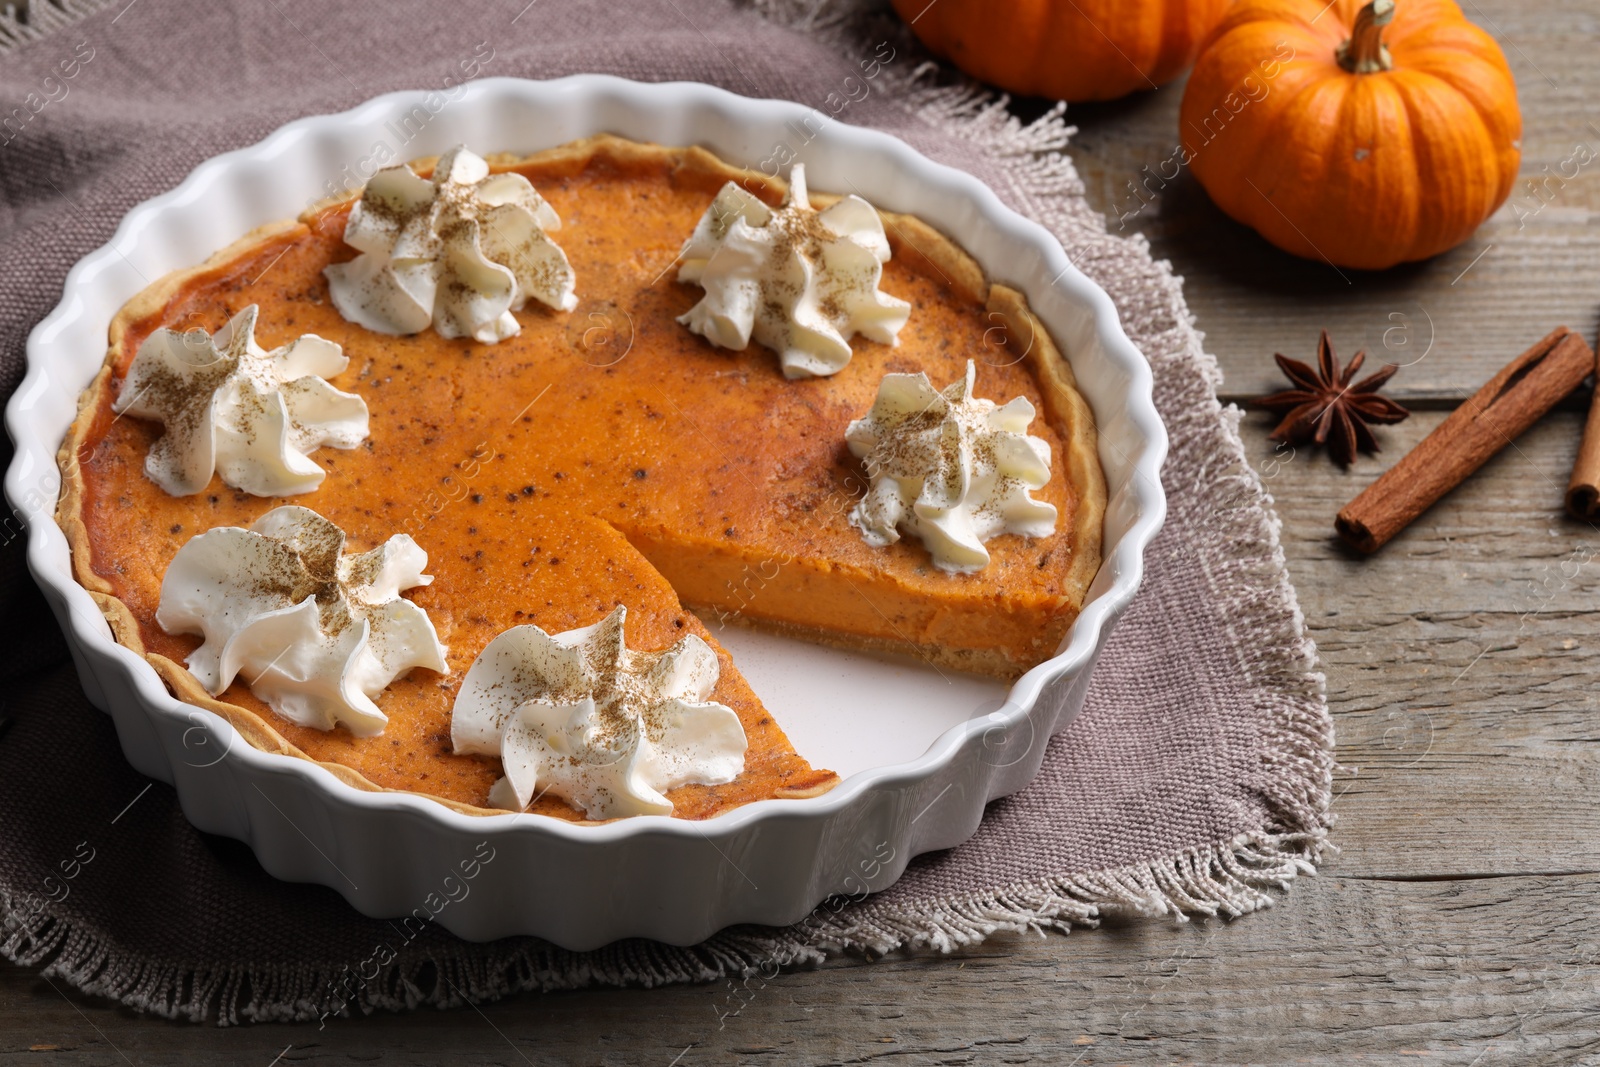 Photo of Delicious pie with pumpkins, whipped cream and spices on wooden table